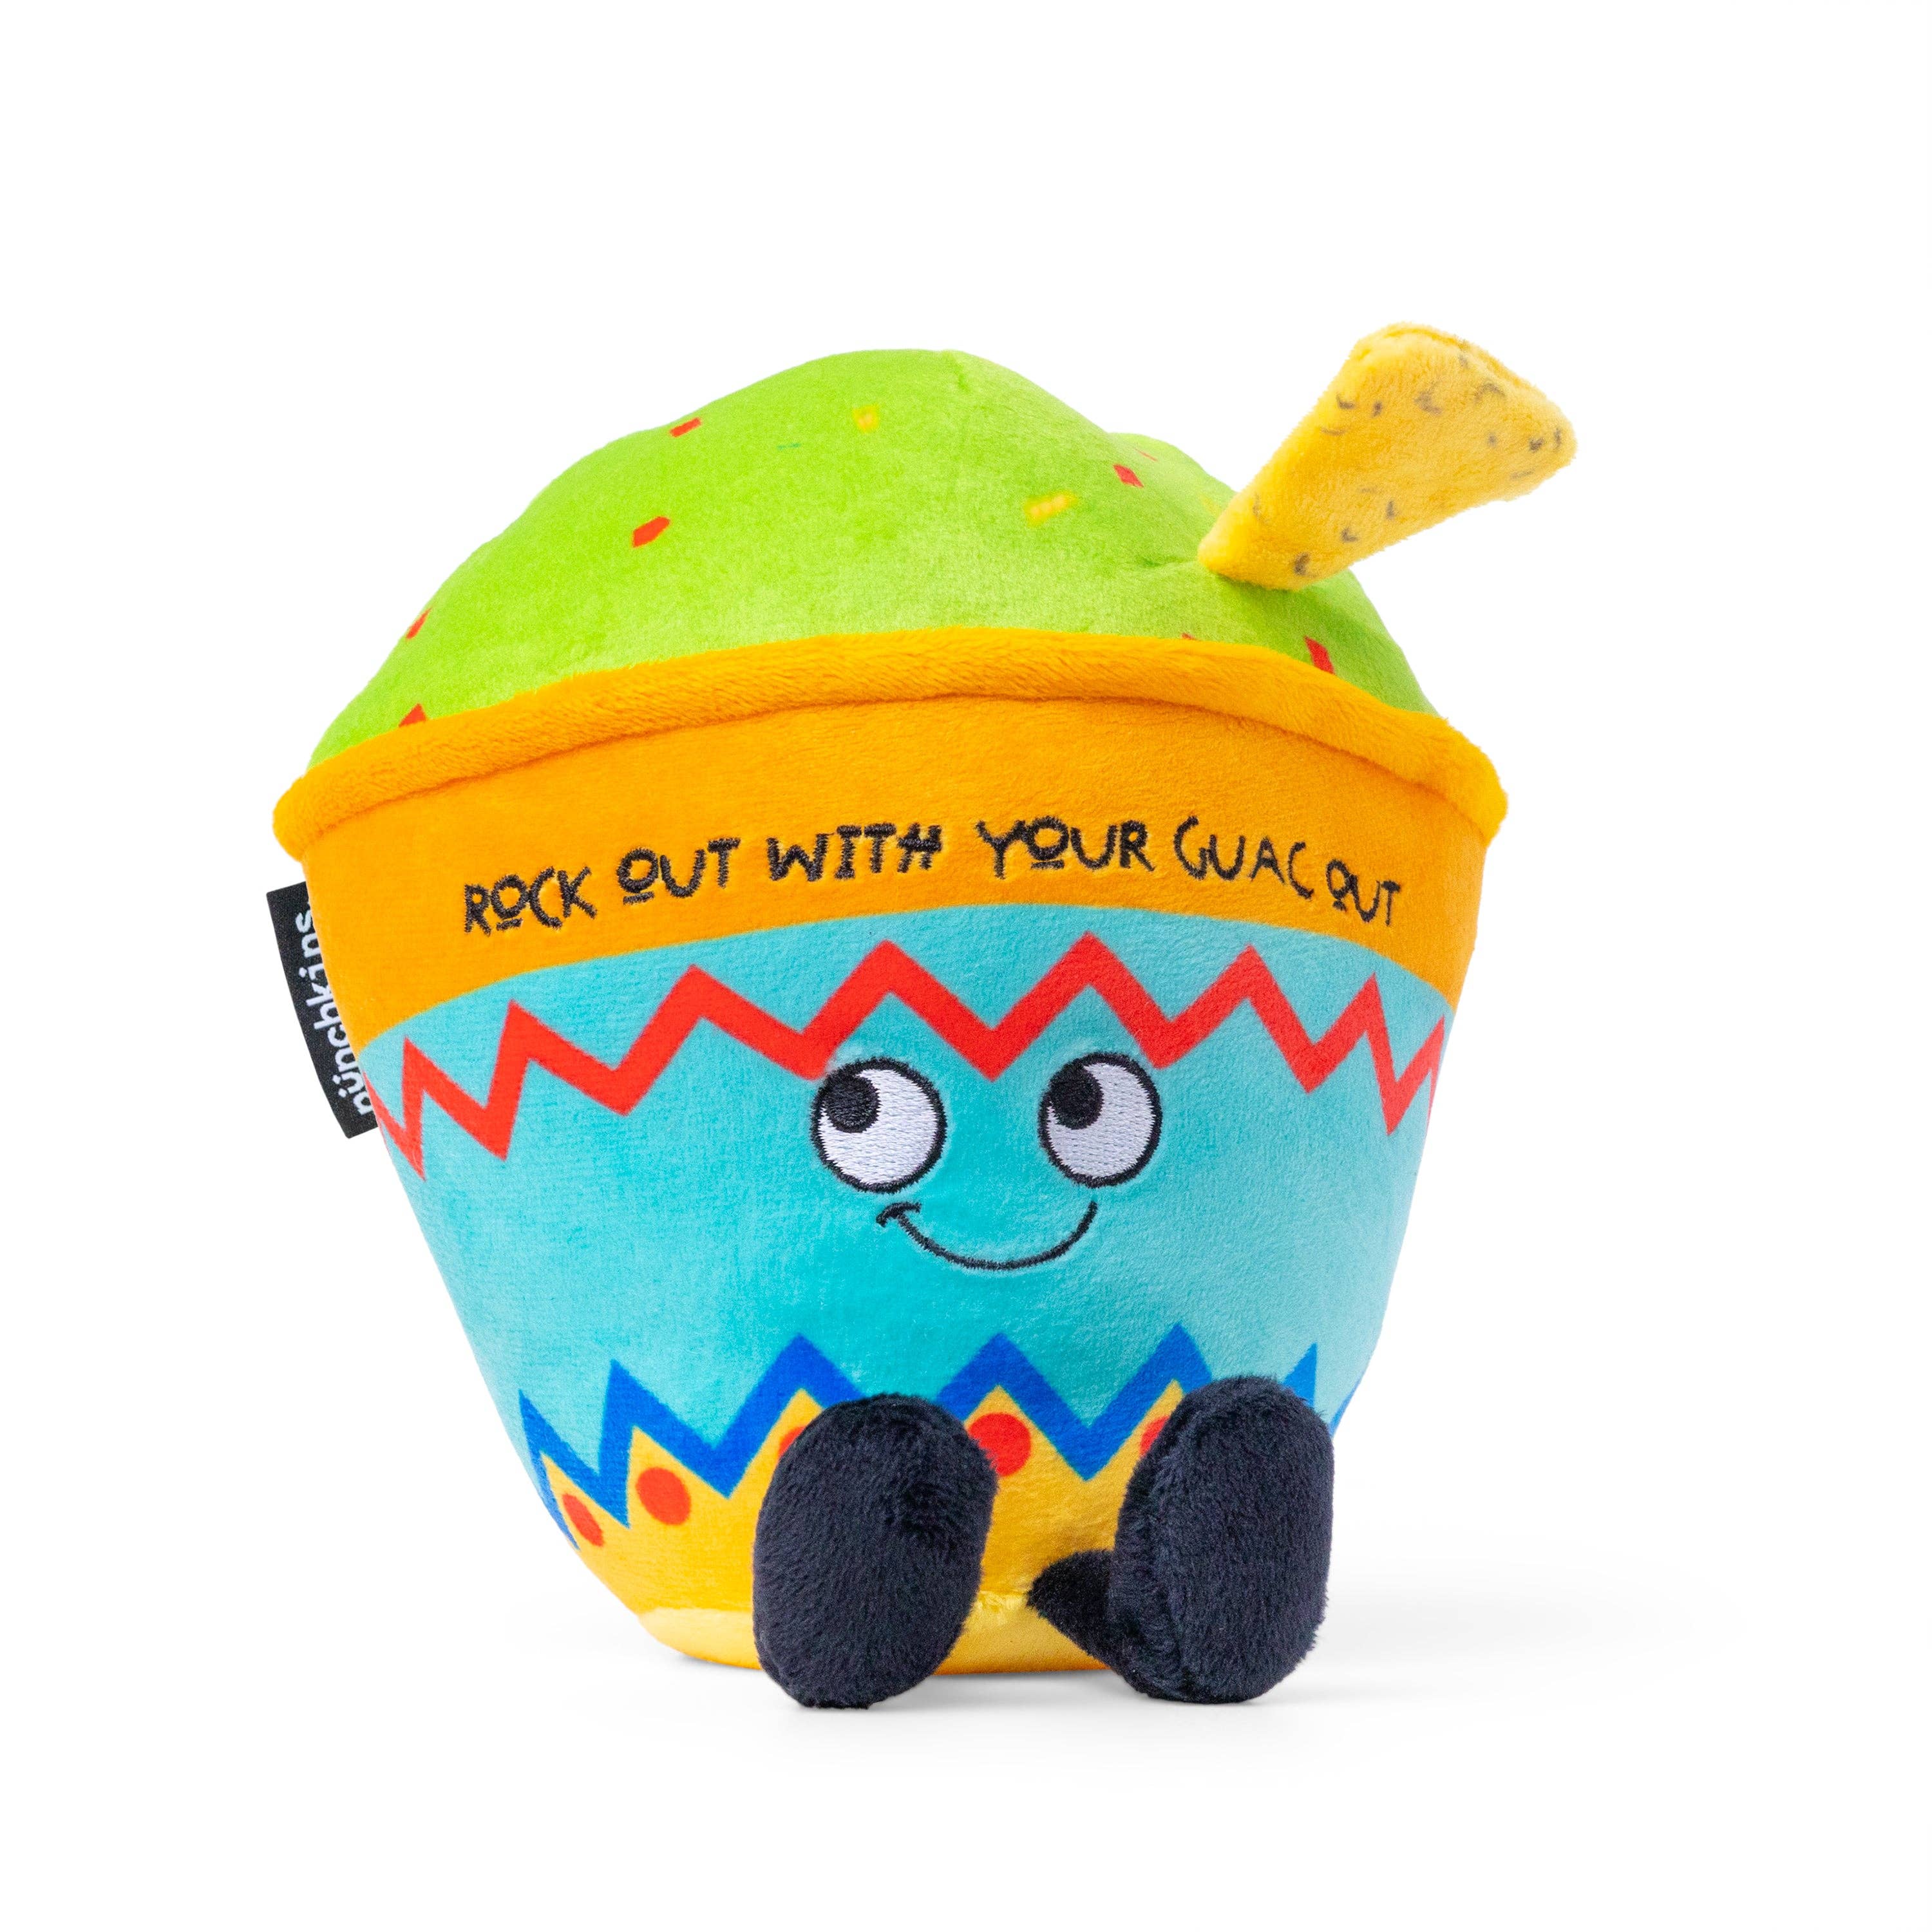 **SALE** "Rock Out With Your Guac Out" Novelty Plush Guacamole Gift